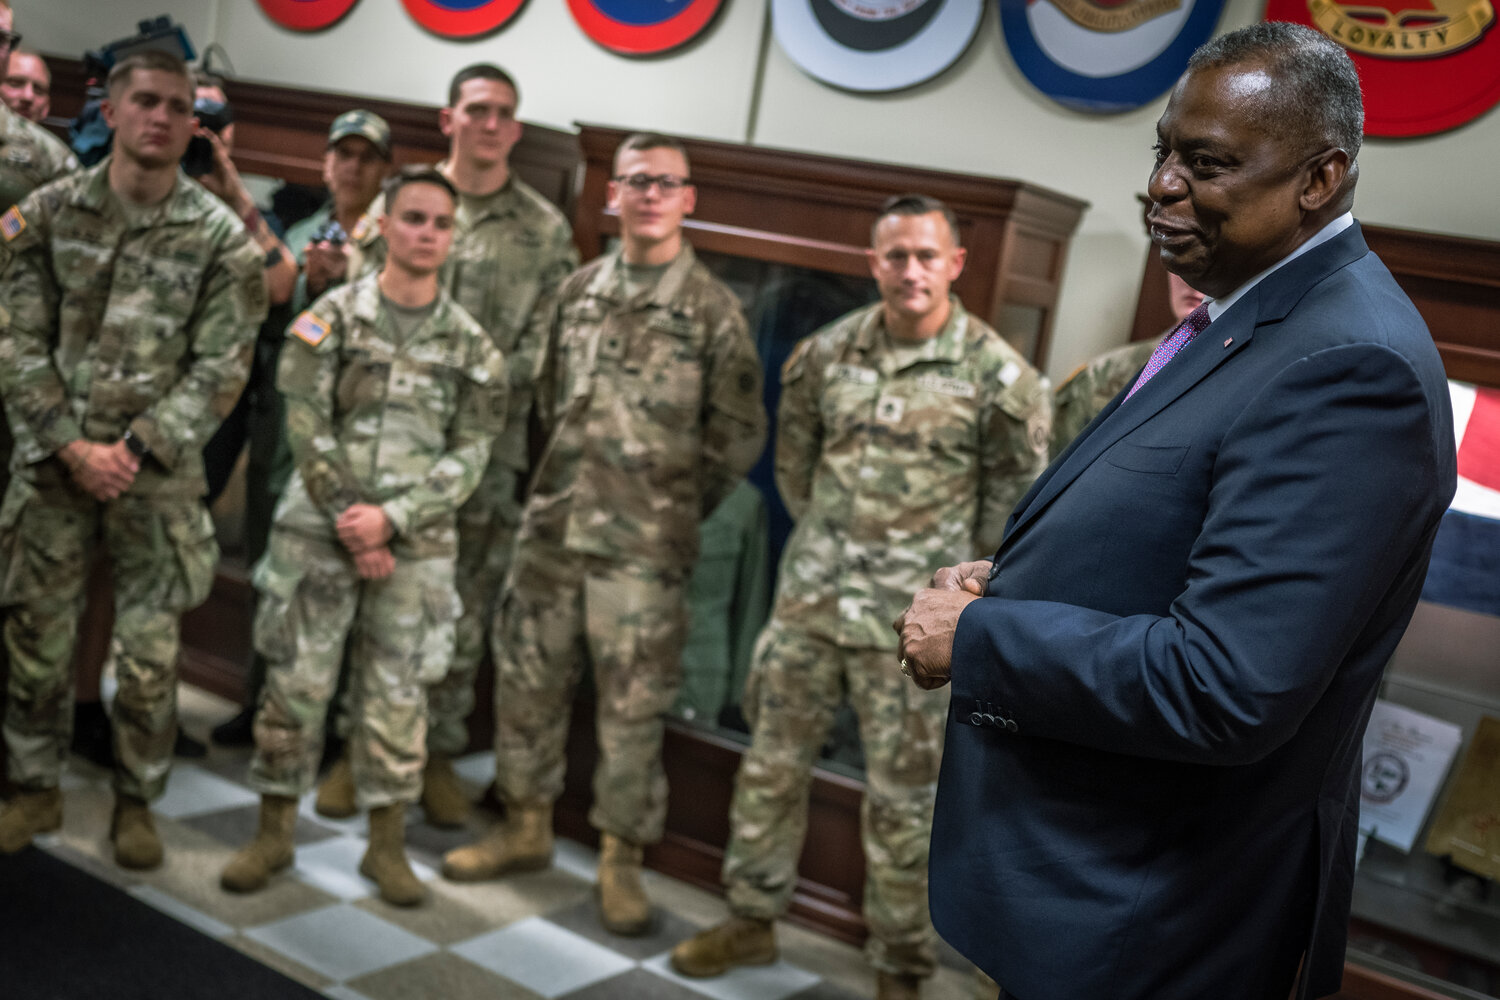 Secretary of Defense Lloyd J. Austin III speaks with soldiers assigned to the 18th Airborne Corps during a visit to Fort Bragg on Friday.